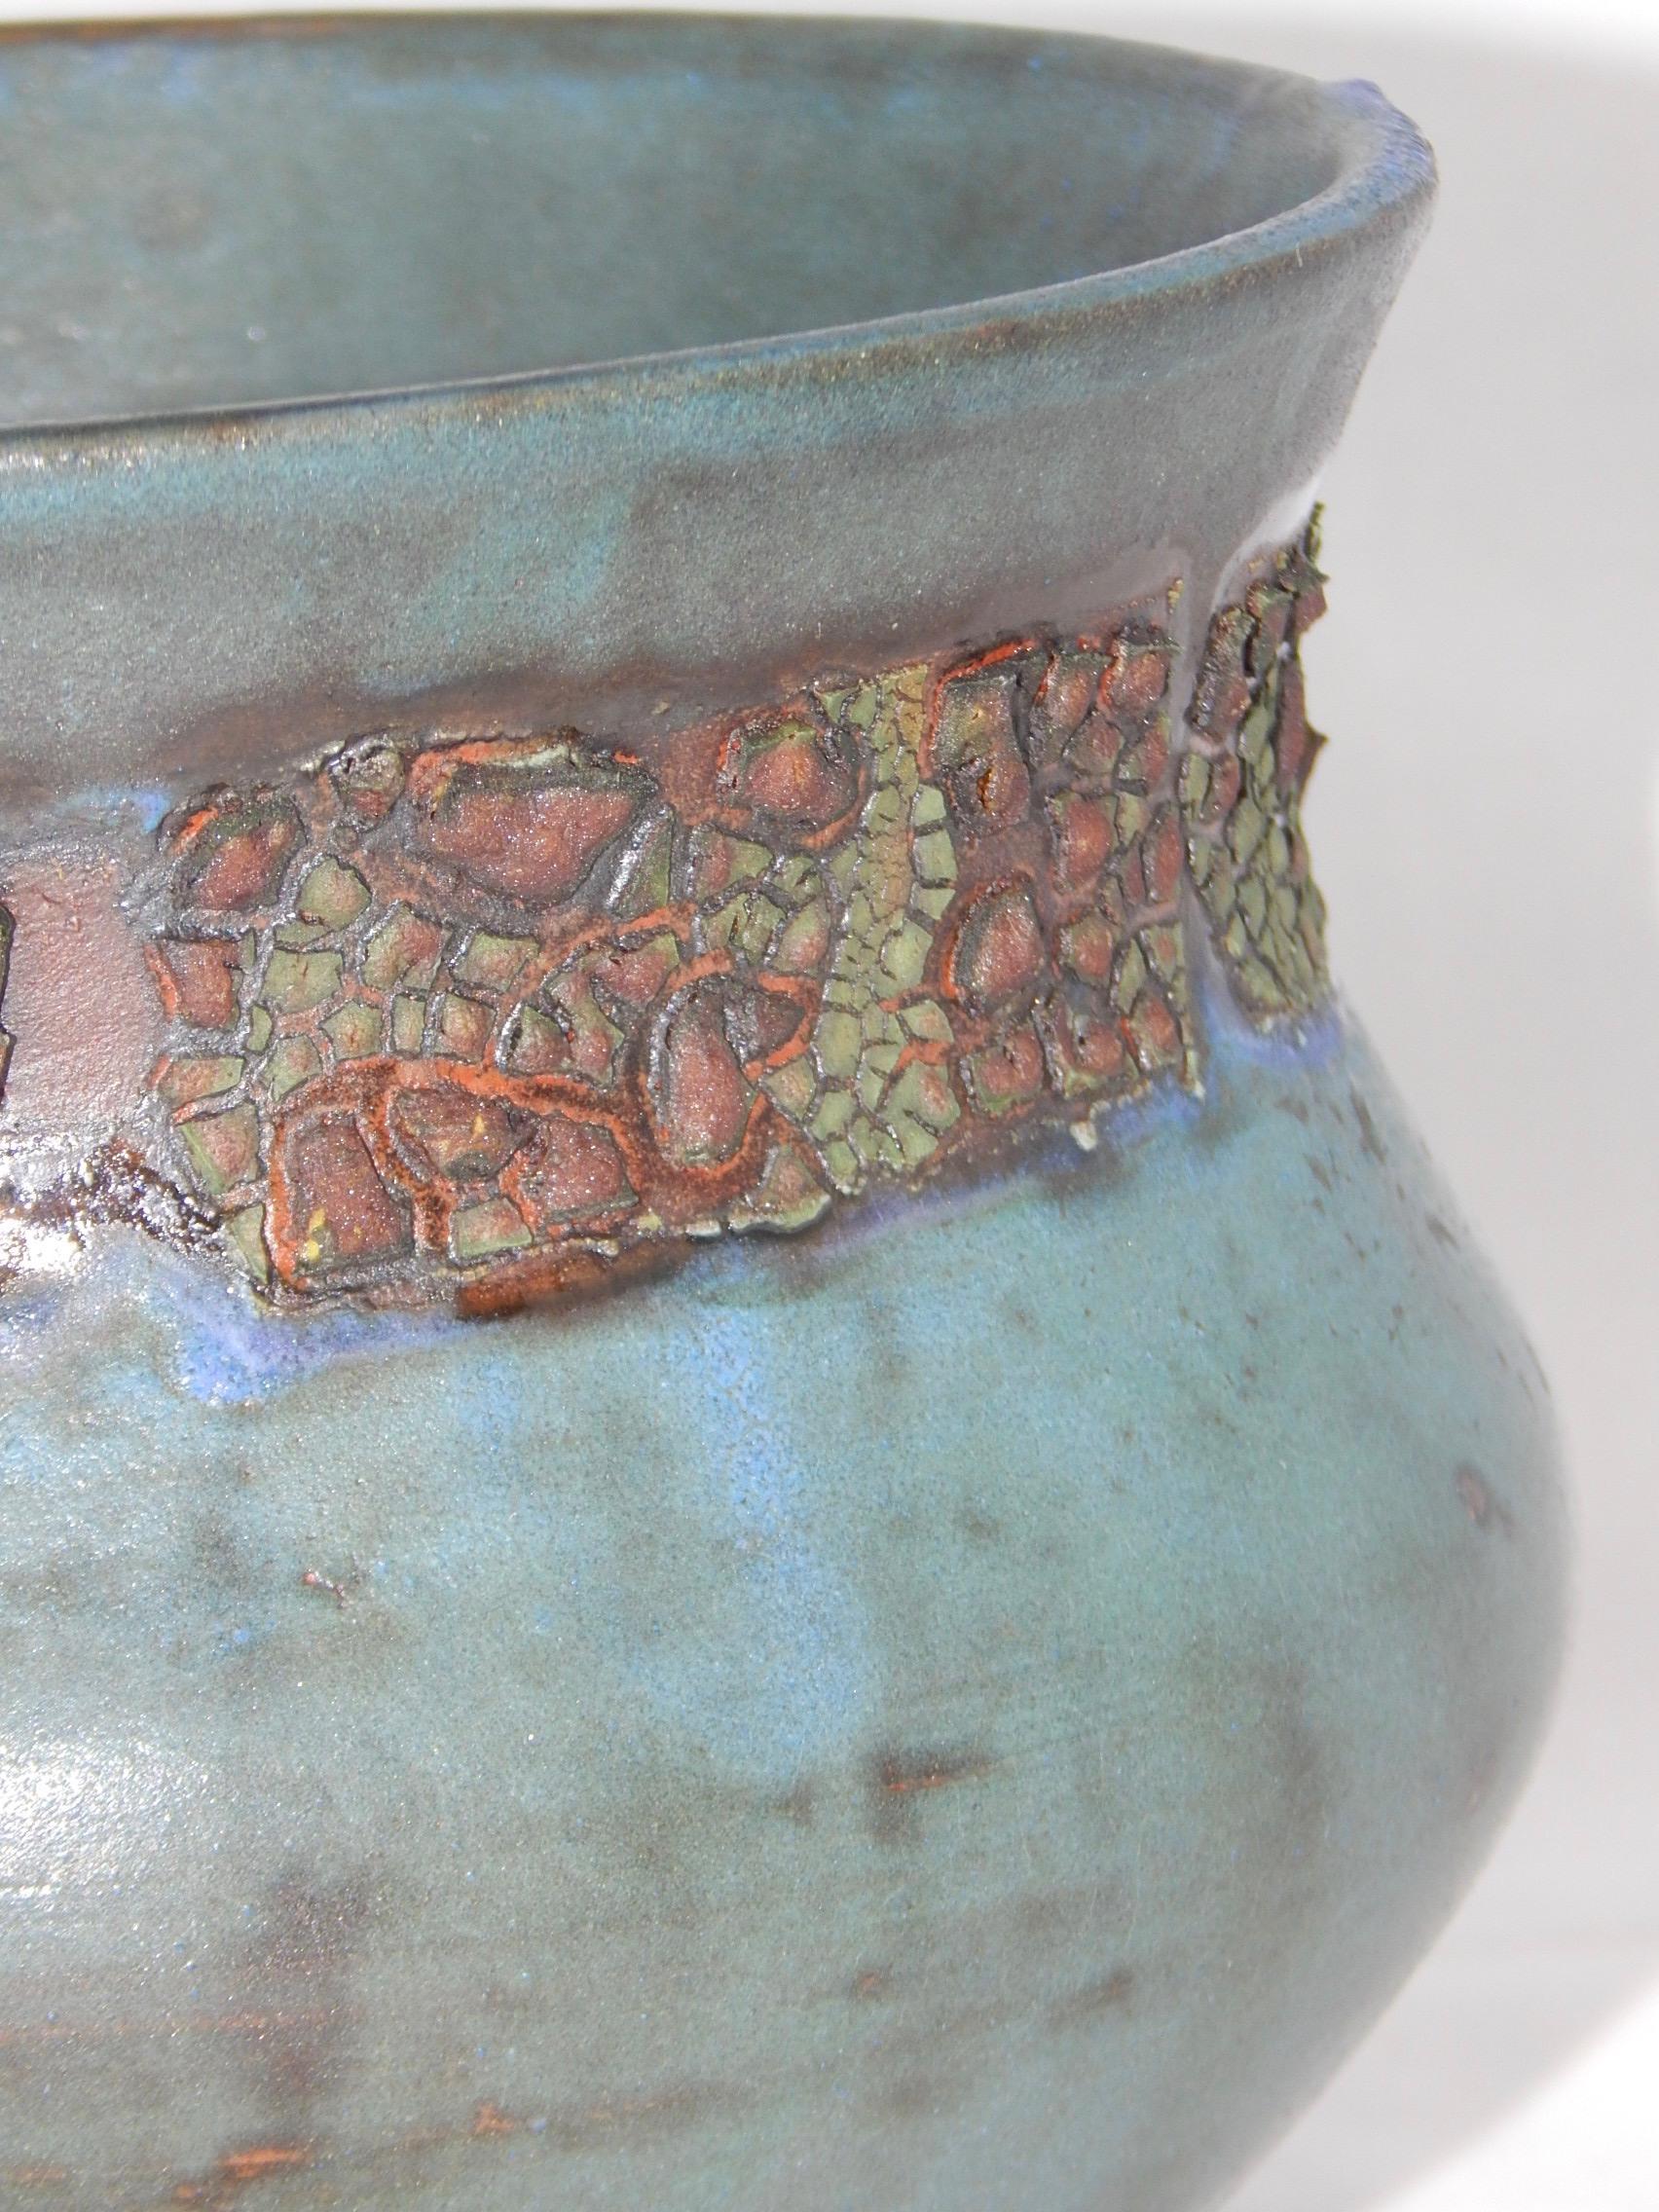 Rocann wheel thrown earthenware vessel by ceramicist Andrew Wilder.
This is a one of a kind object made in the ancient way- by hand in a small artisanal pottery. In this series Wilder explores the application of lichen under glazes to achieve